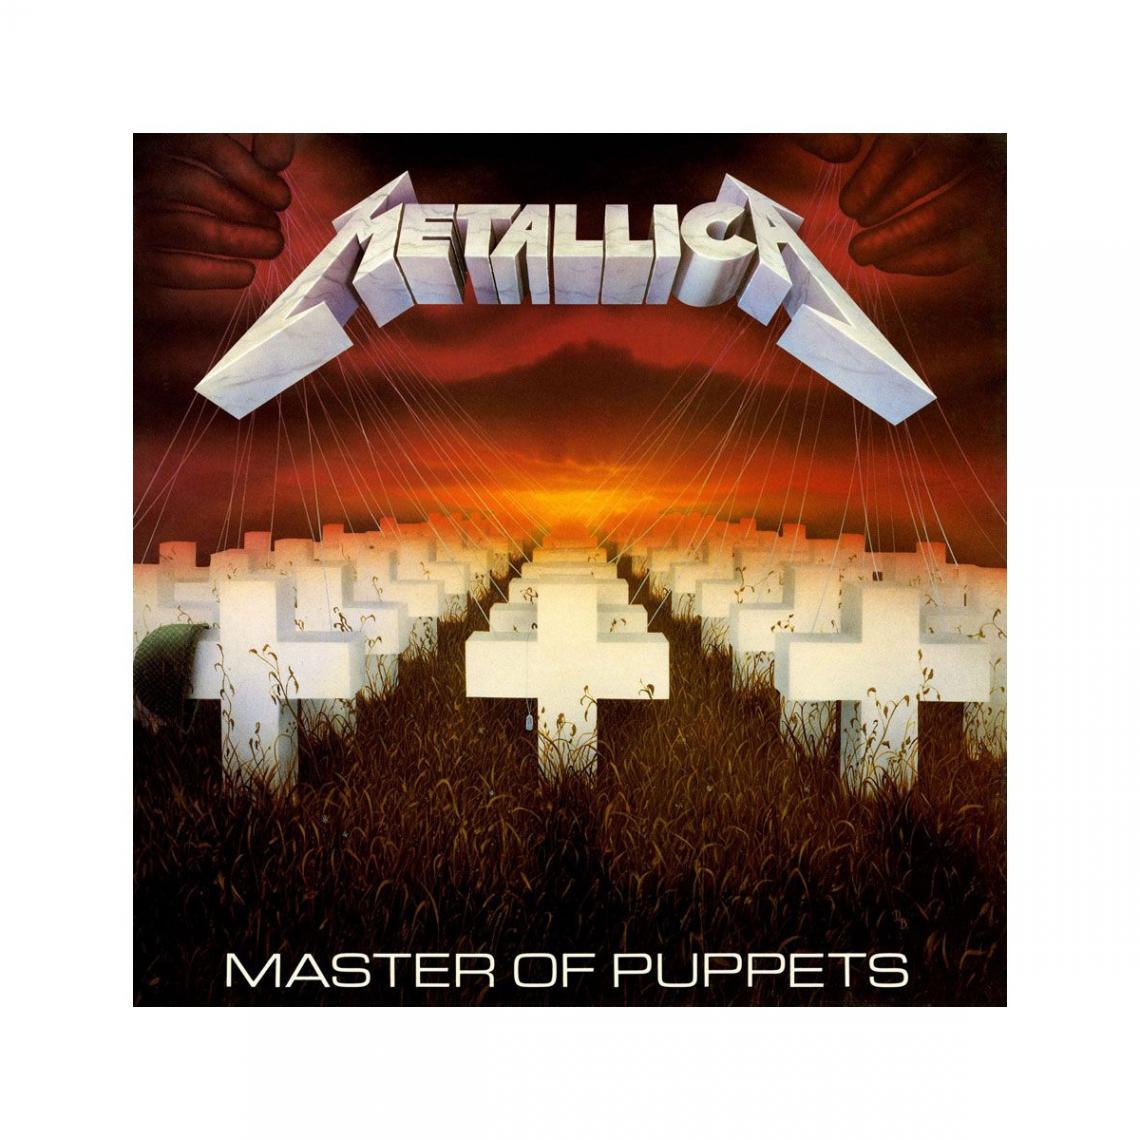 Phd Merchandise - Metallica - Puzzle Rock Saws Master Of Puppets (1000 pièces) - Puzzles 3D